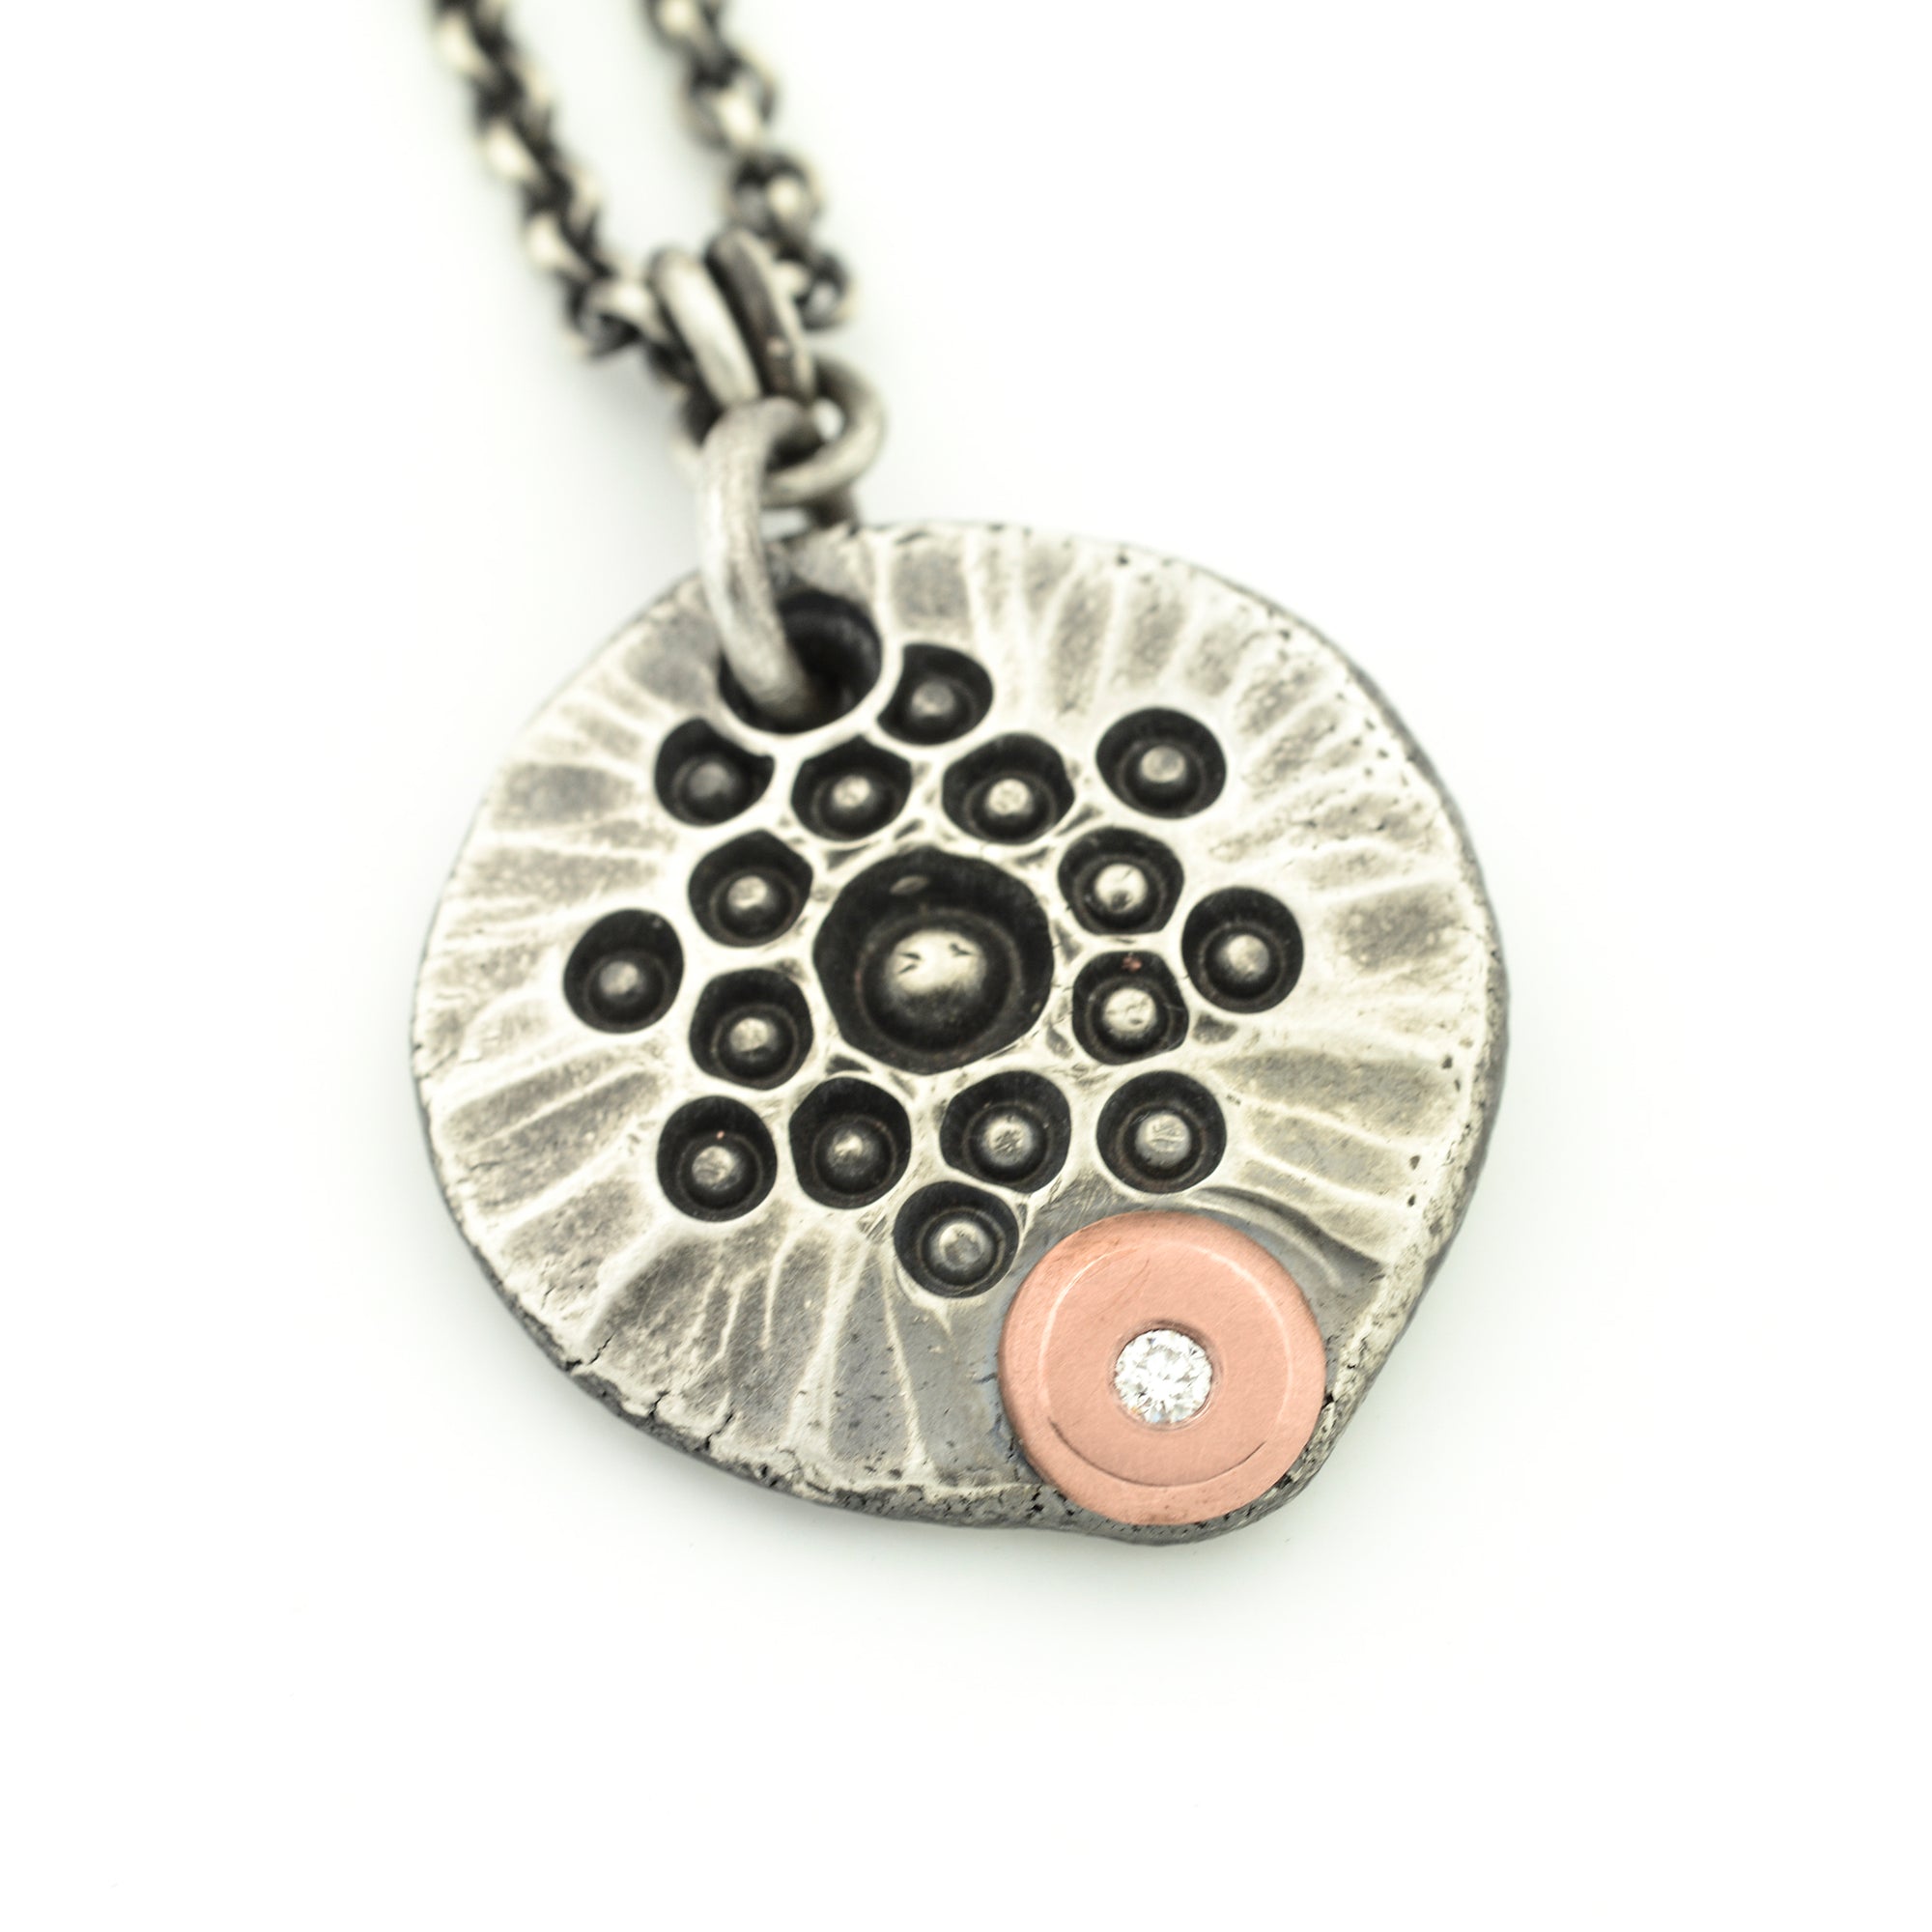 Forged Sterling and Copper Pendant with Ideal Cut Diamond